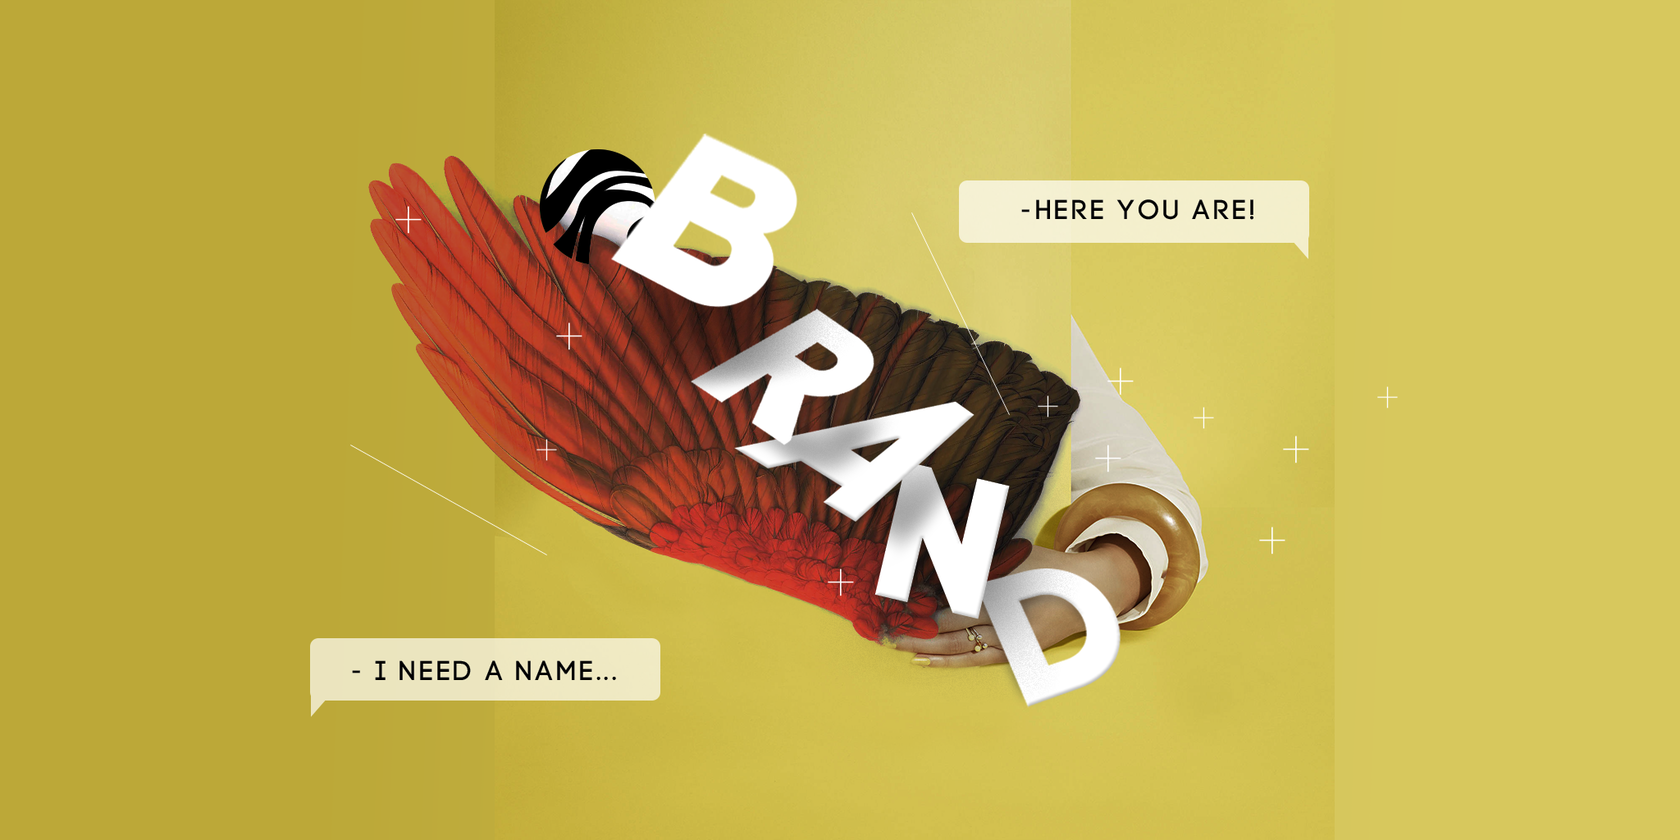 Hi! My name is How to choose a name for your brand